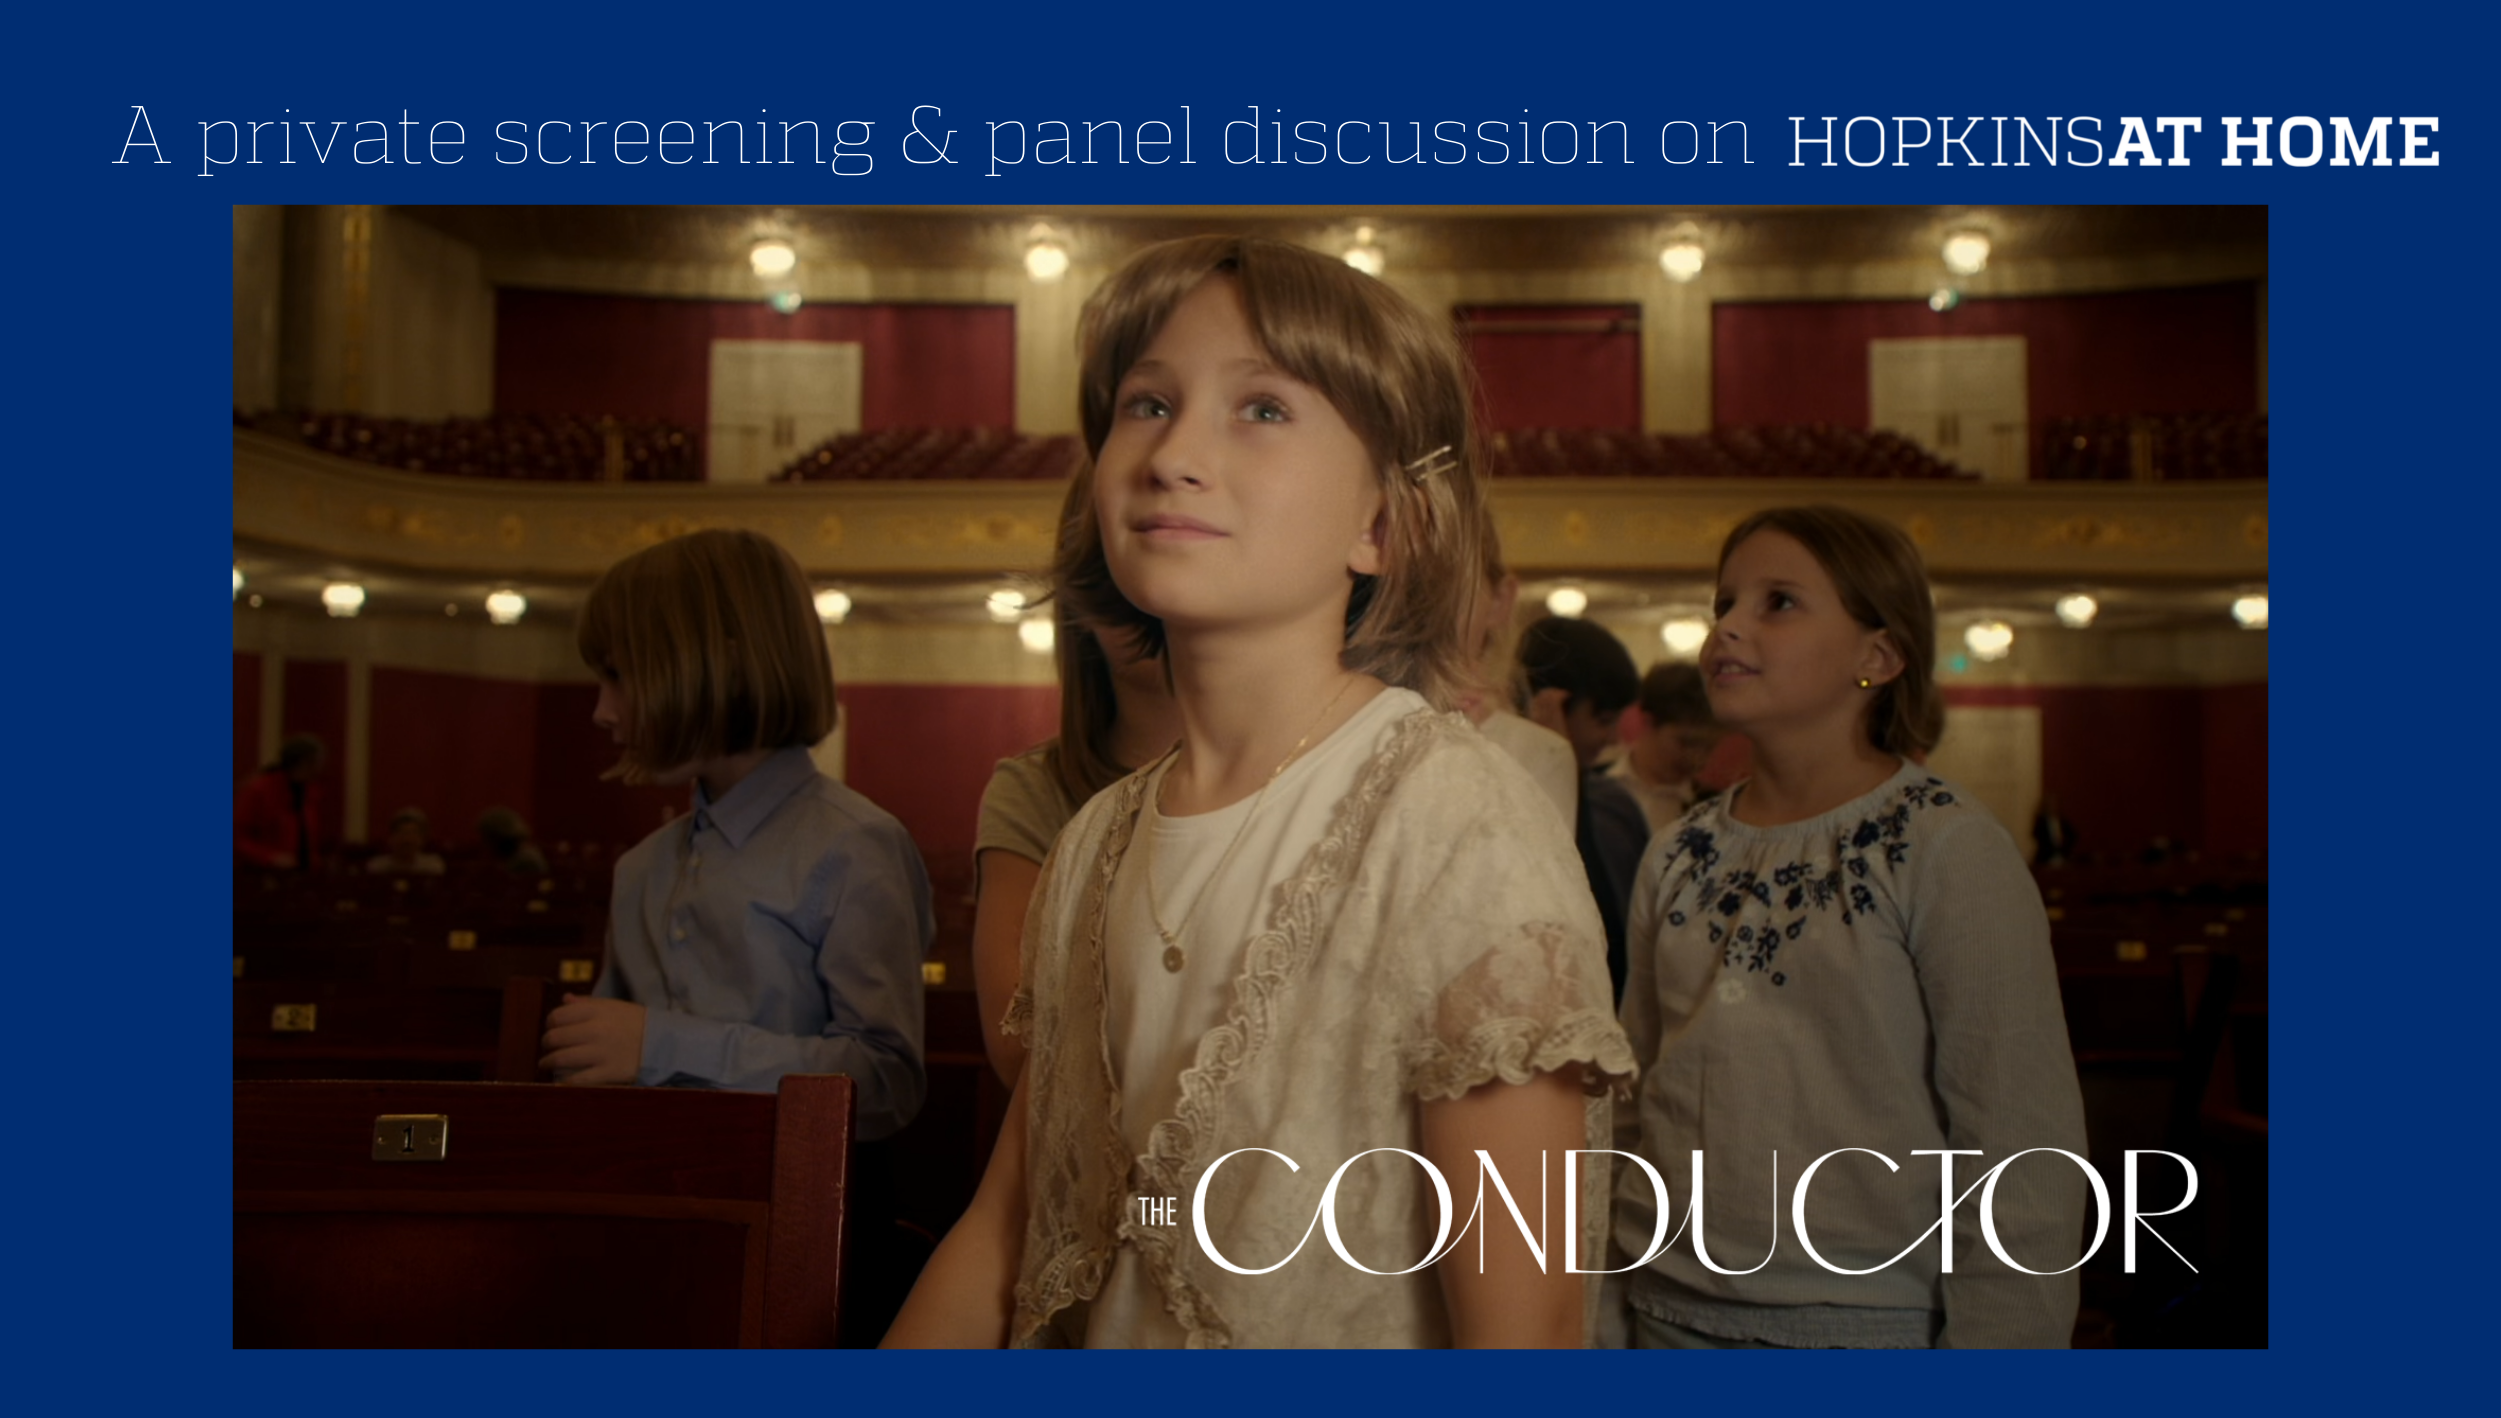 The Conductor Screening